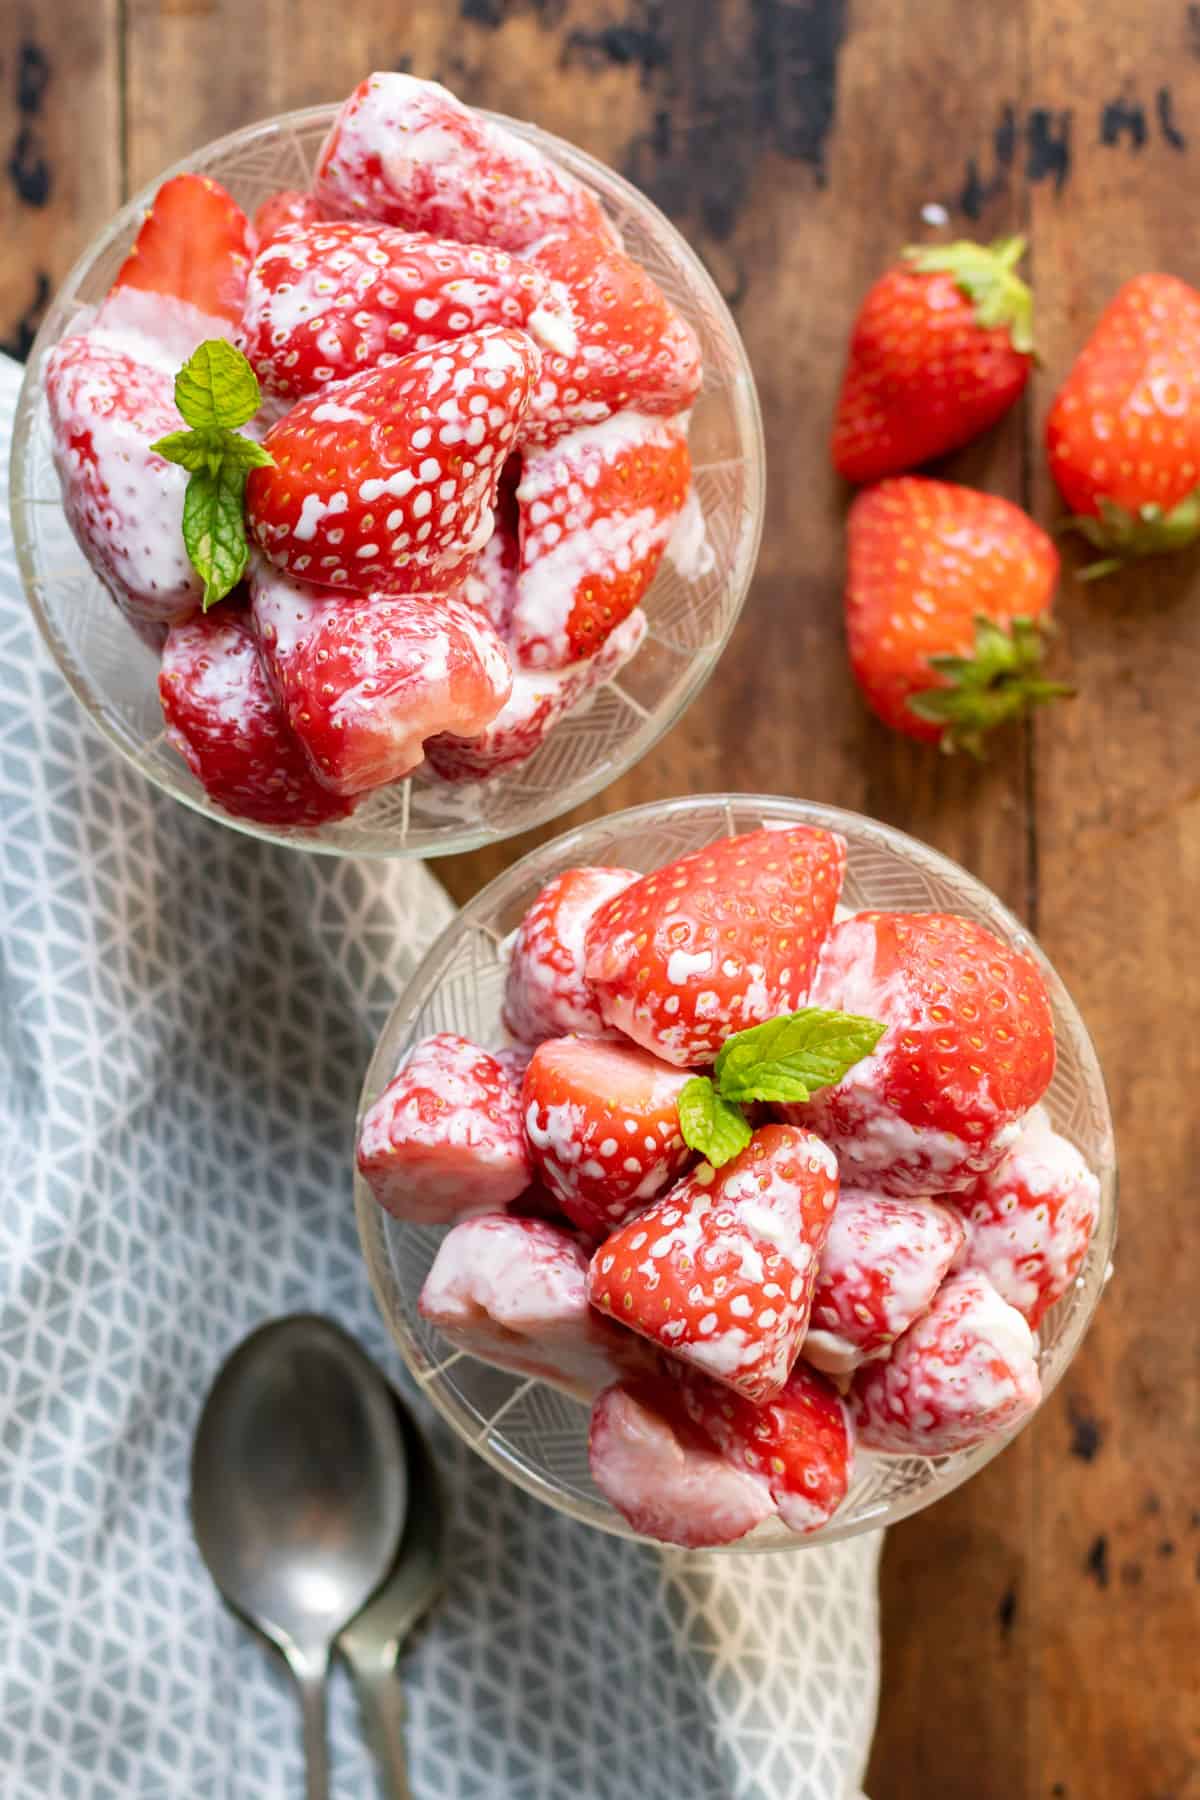 Two glass dishes with strawberries and cream.